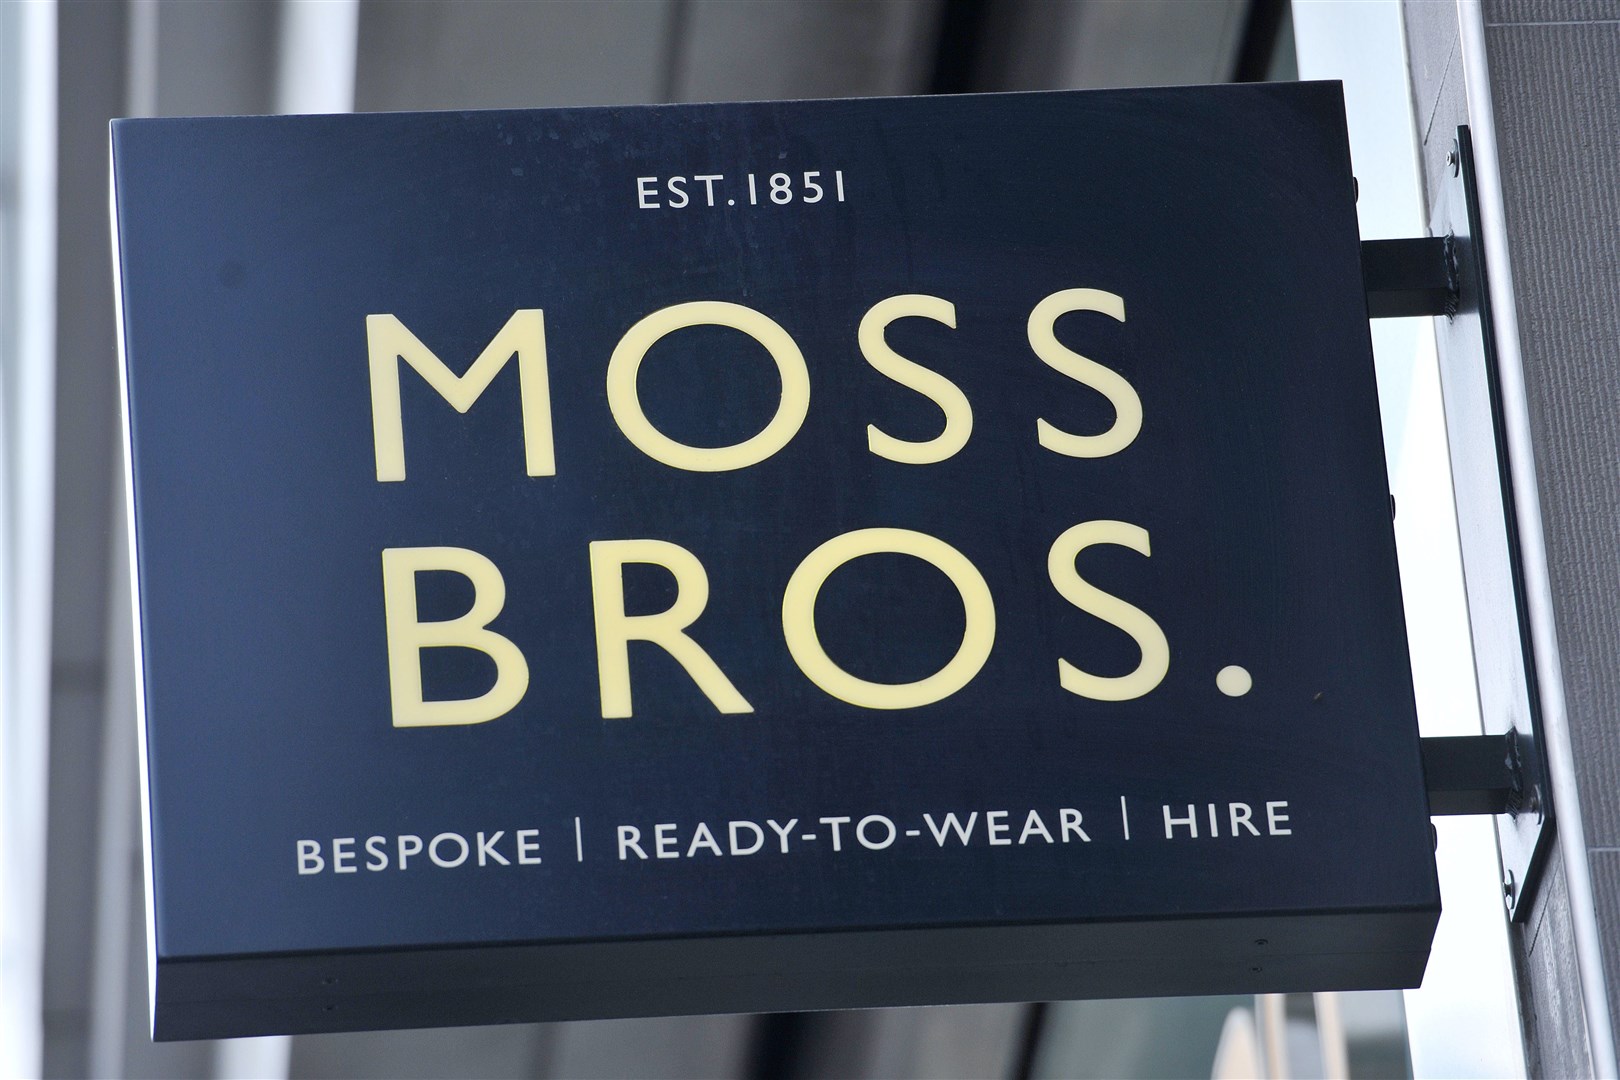 Moss Bros restructures after closures and cancelled events hit sales